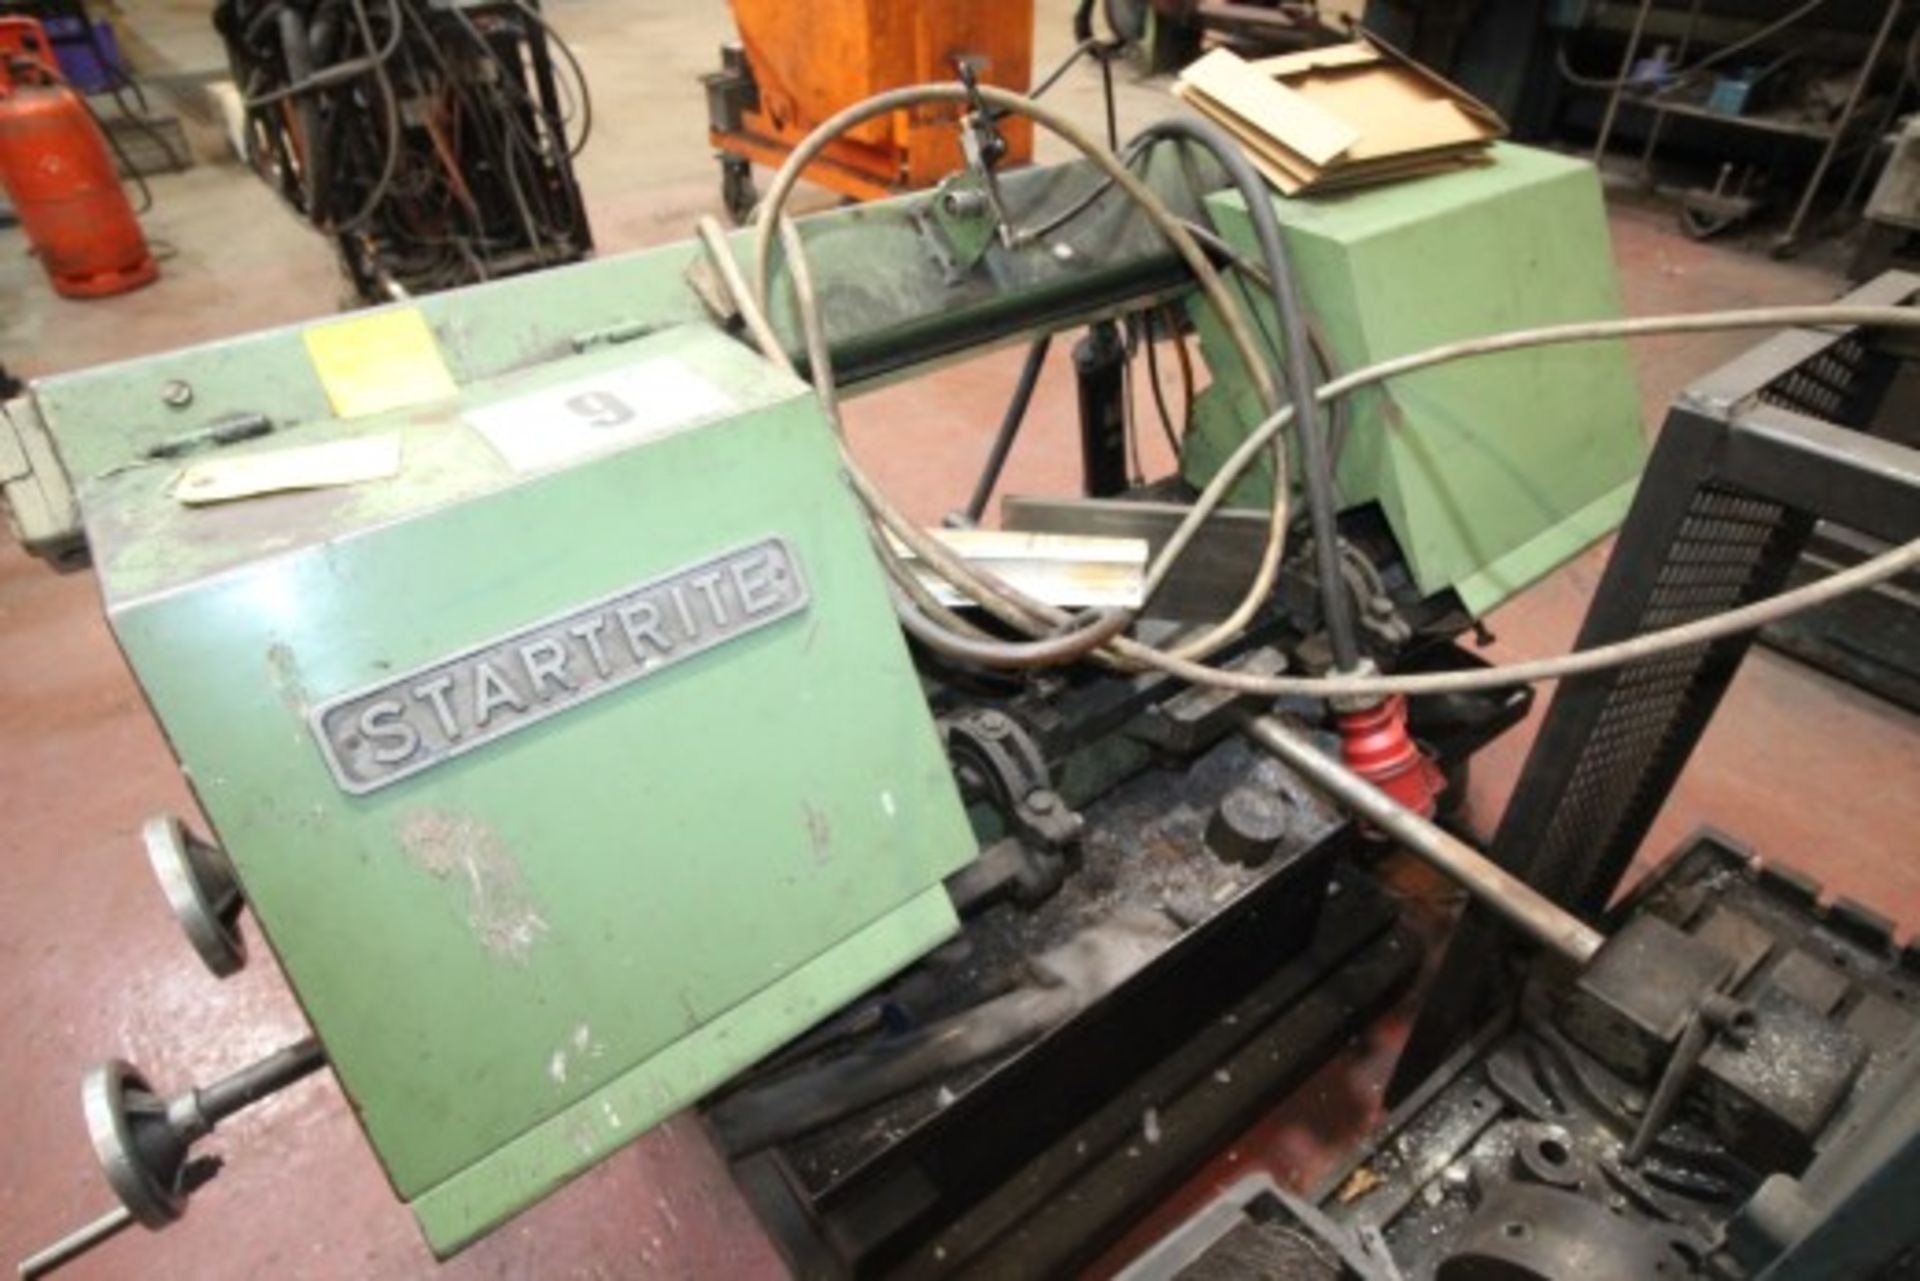 STARTRITE HORIZONTAL BAND SAW, SERIAL NO. 41731624, TYPE UMB 220, 3-PHASE ELECTRIC WITH MANUAL